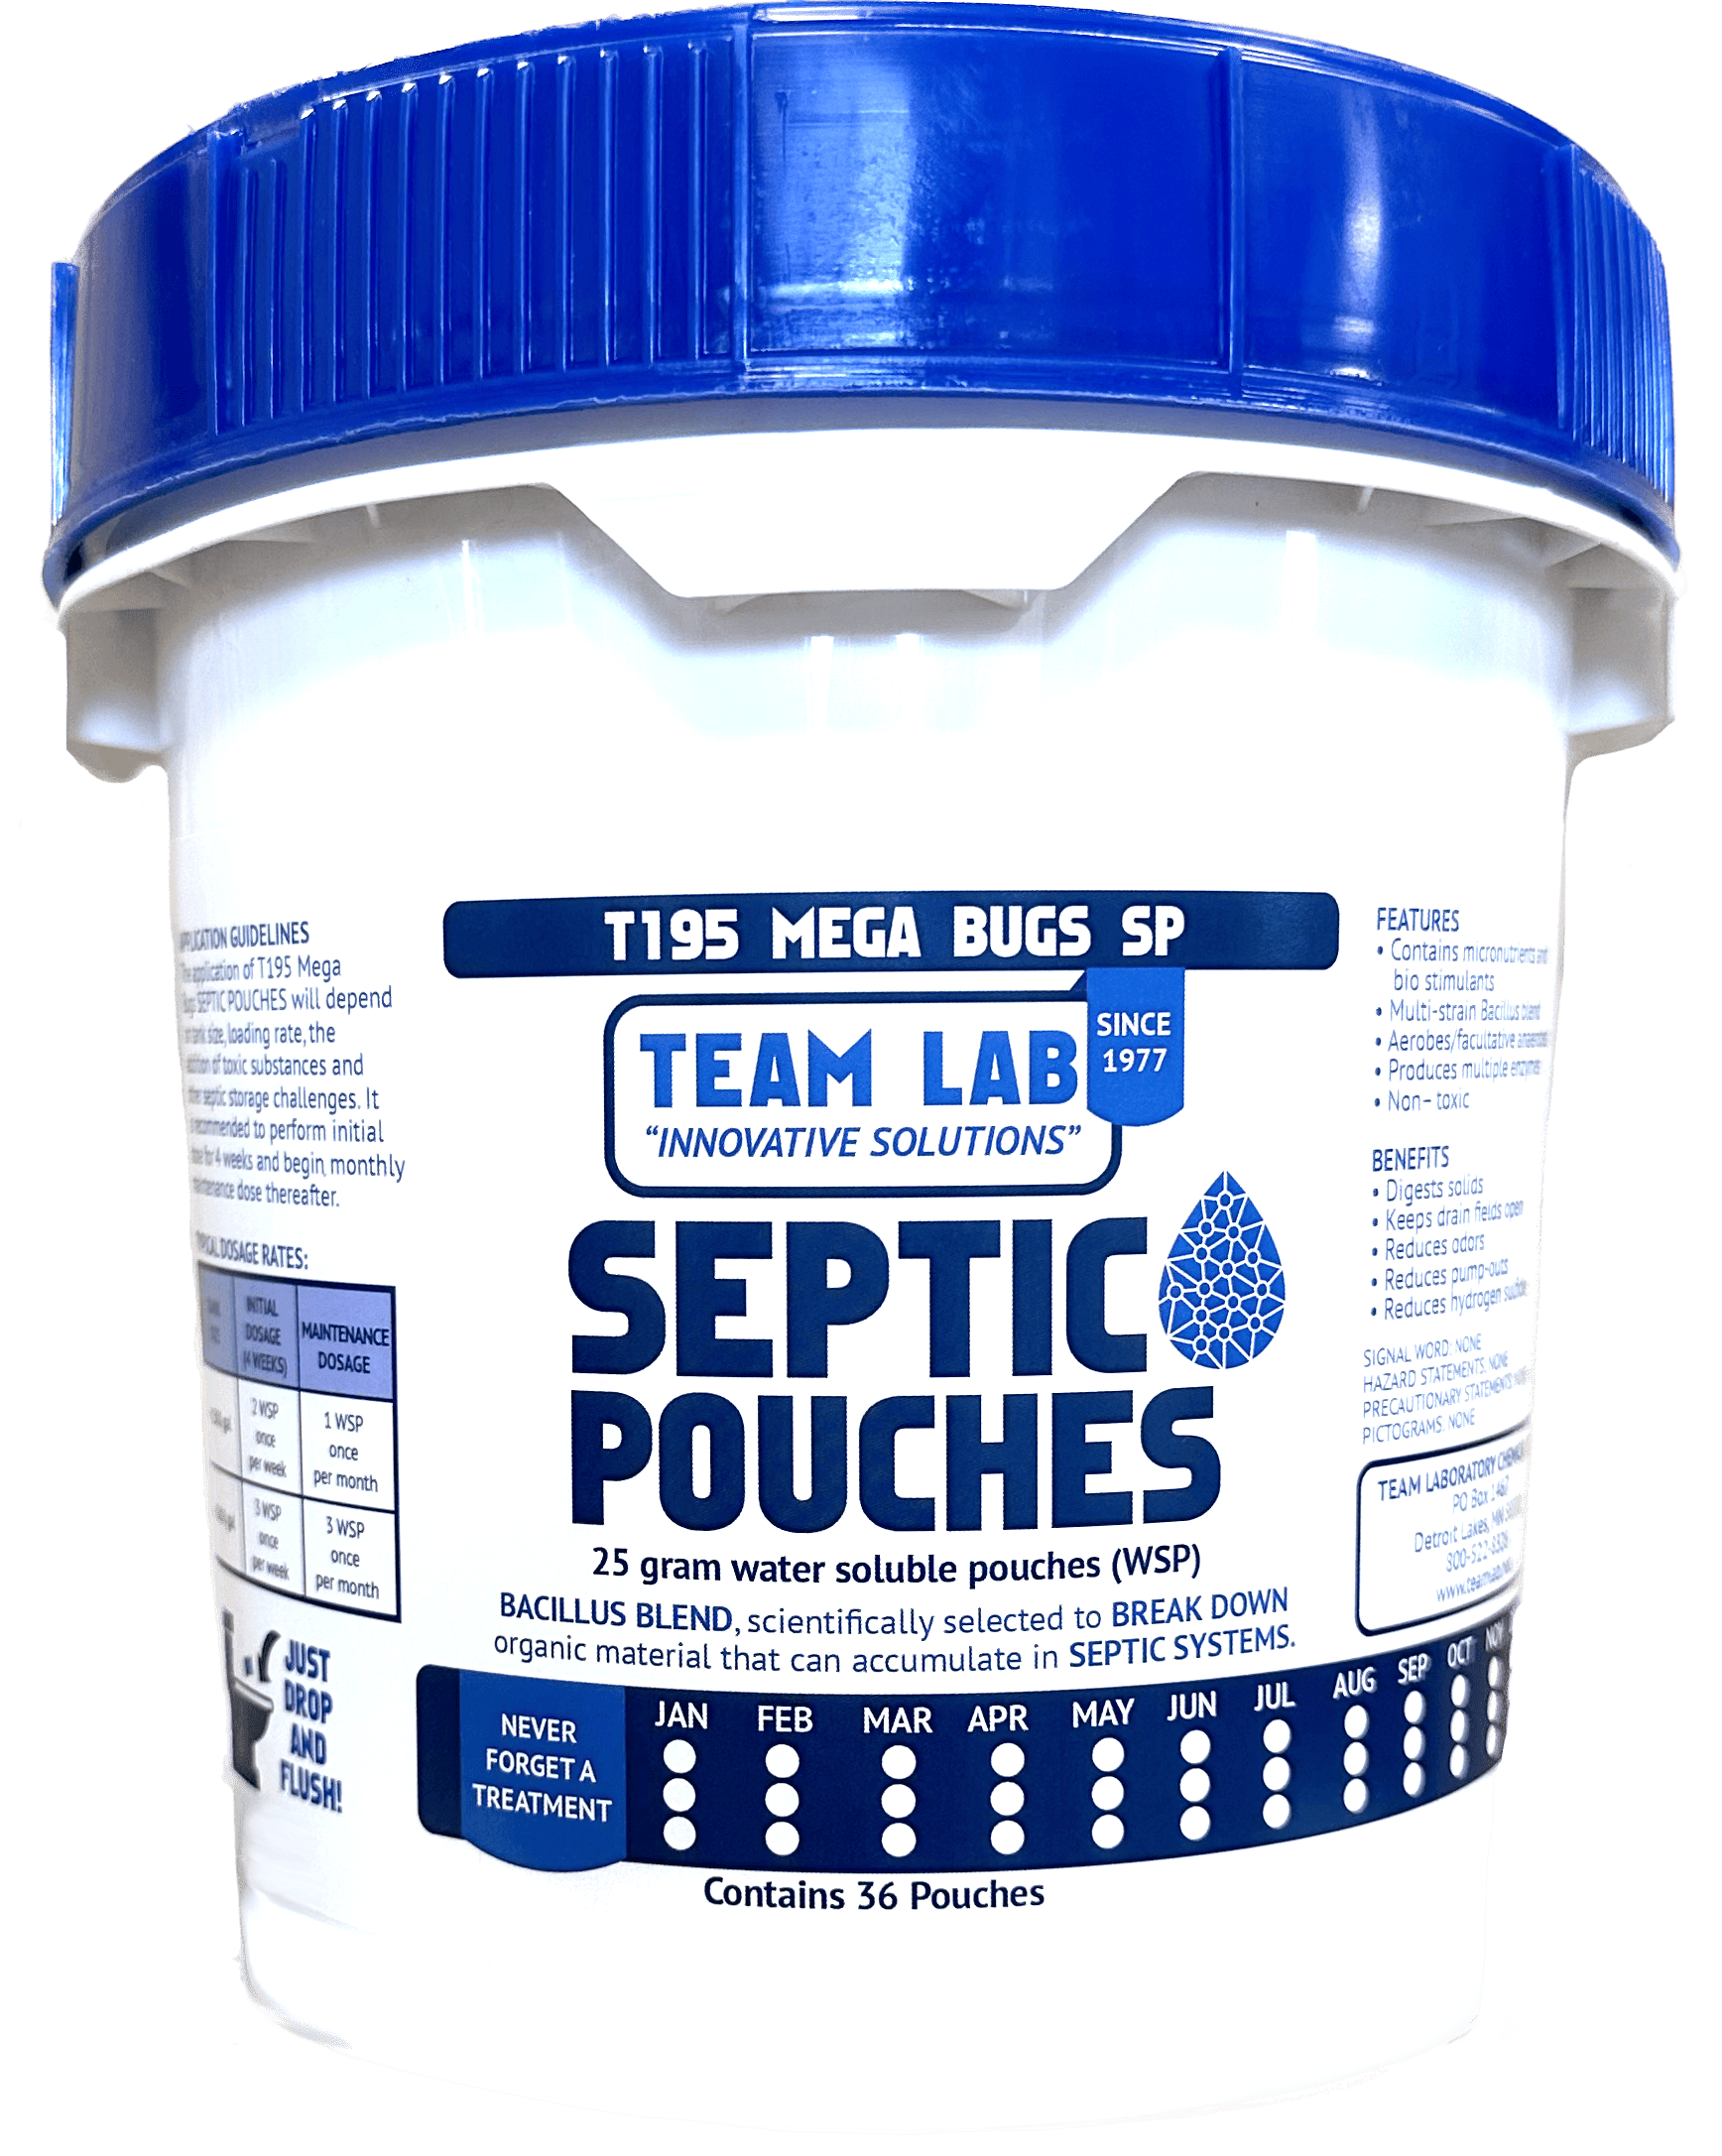 Septic Pouches